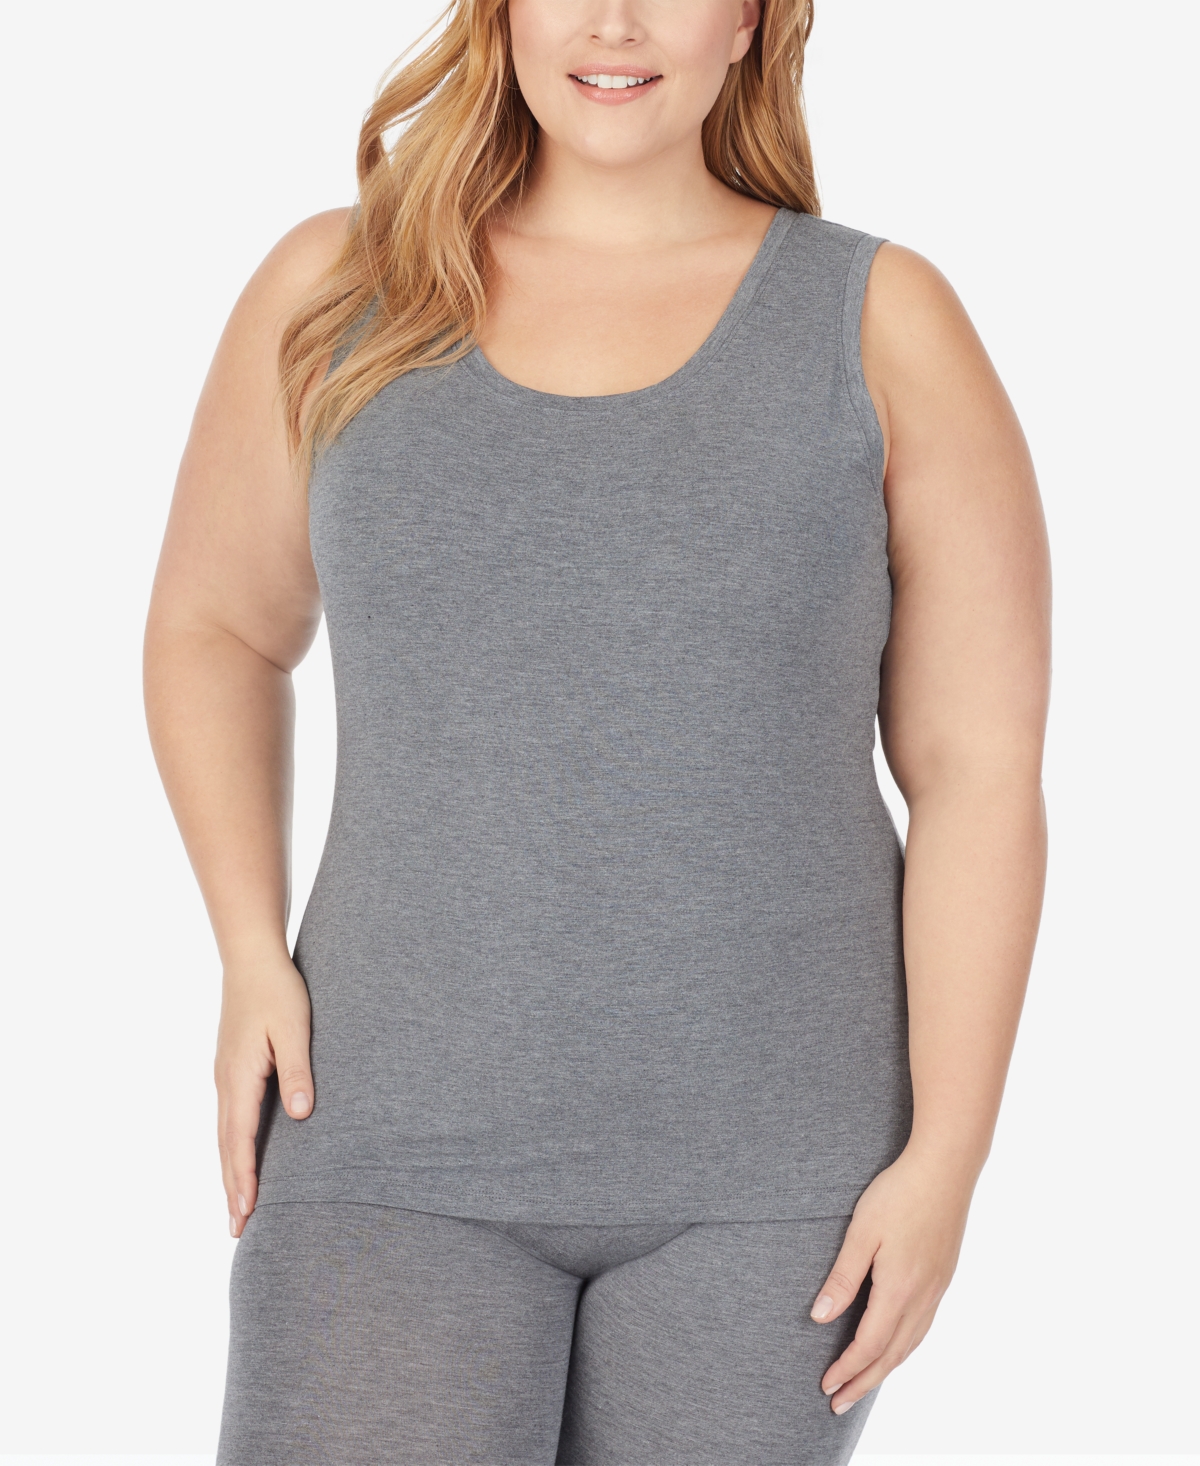 Plus Size Softwear with Stretch Reversible Tank Top - Black